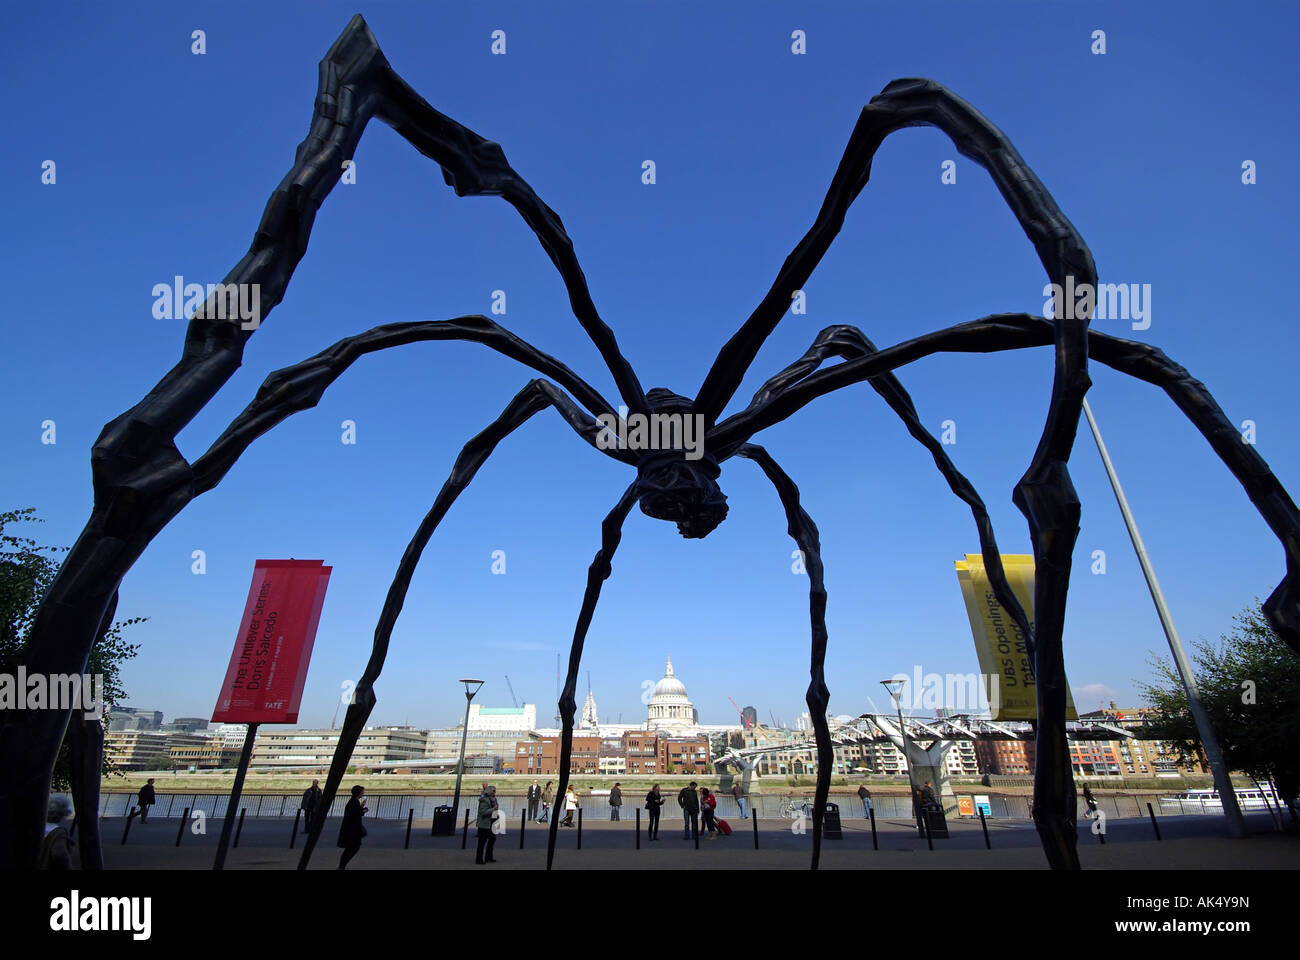 Maman Spider sculpture at  London Tate Modern forming a frame for Dome of St Pauls cathedral and City of London skyline beyond Stock Photo